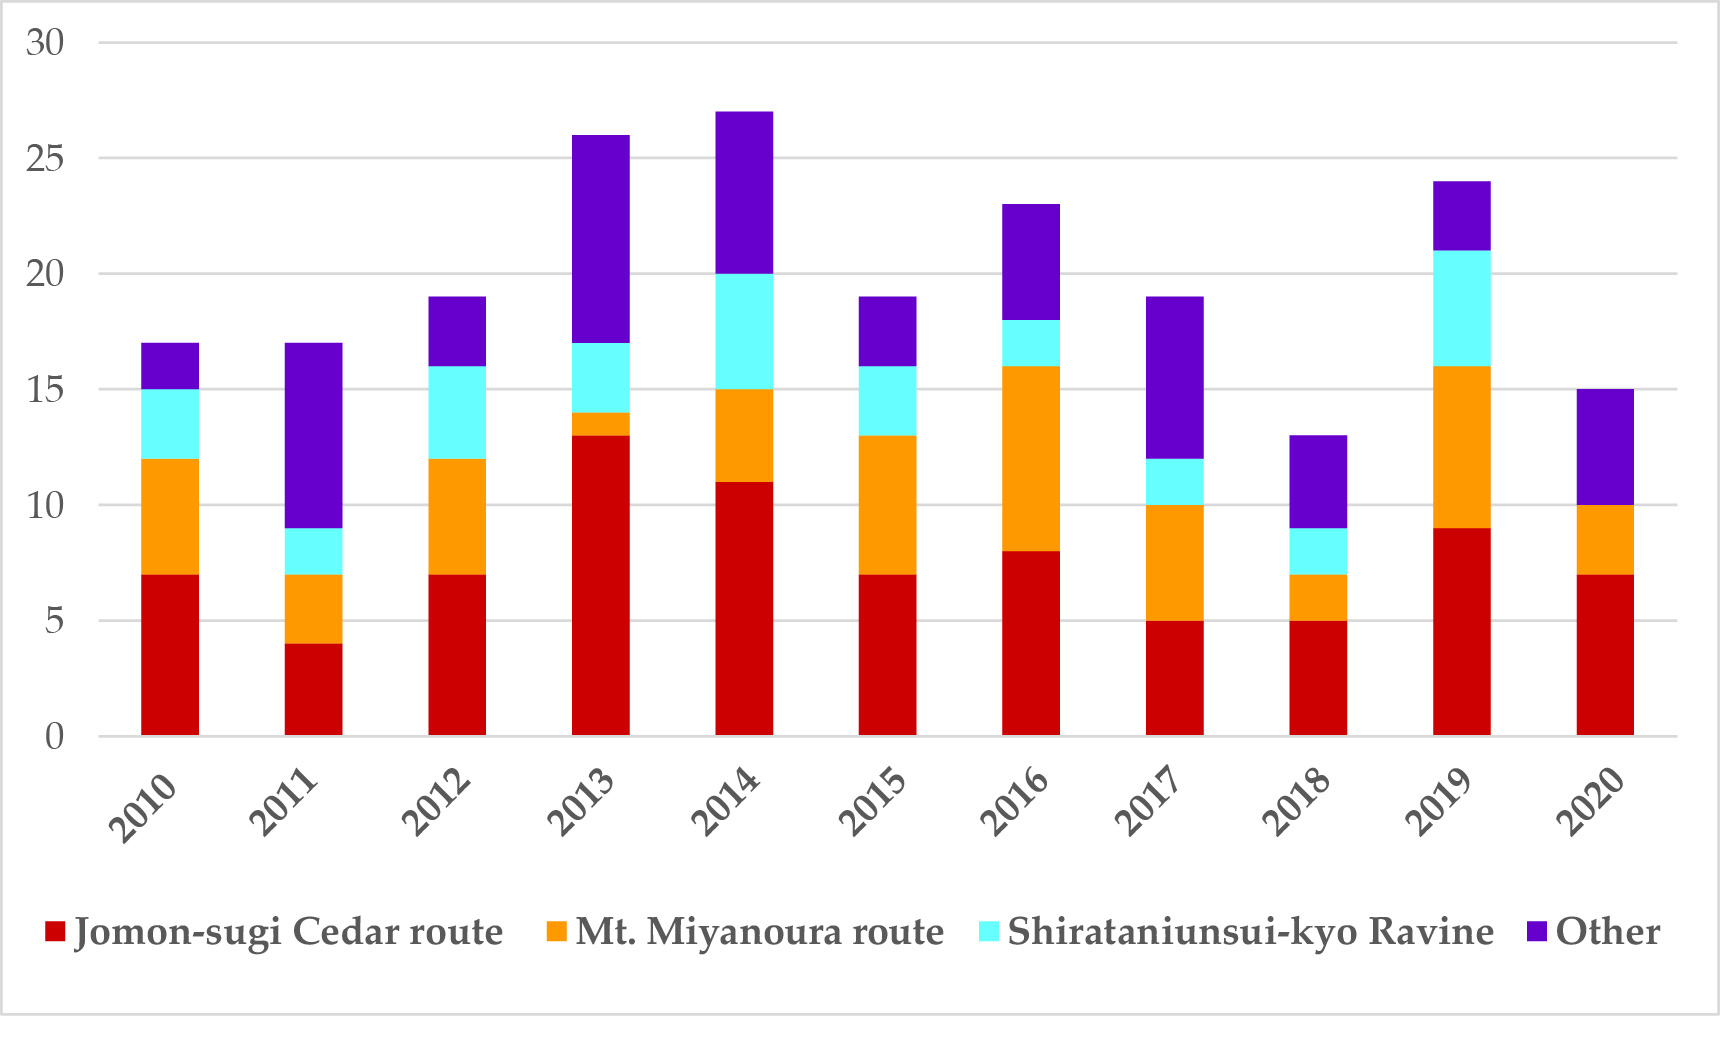 Graph of the trend in number of accidents and injuries in the Yakushima Mountain area. Approximately 20 accidents and injuries have occurred each year over the past 10 years (FY 2010 to FY 2020) in the Yakushima Mountain area. Occurrences in the three main areas (Jomon-sugi Cedar route, Mt. Miyanoura route and Shirataniunsui-kyo Ravine) account for the majority of the total.